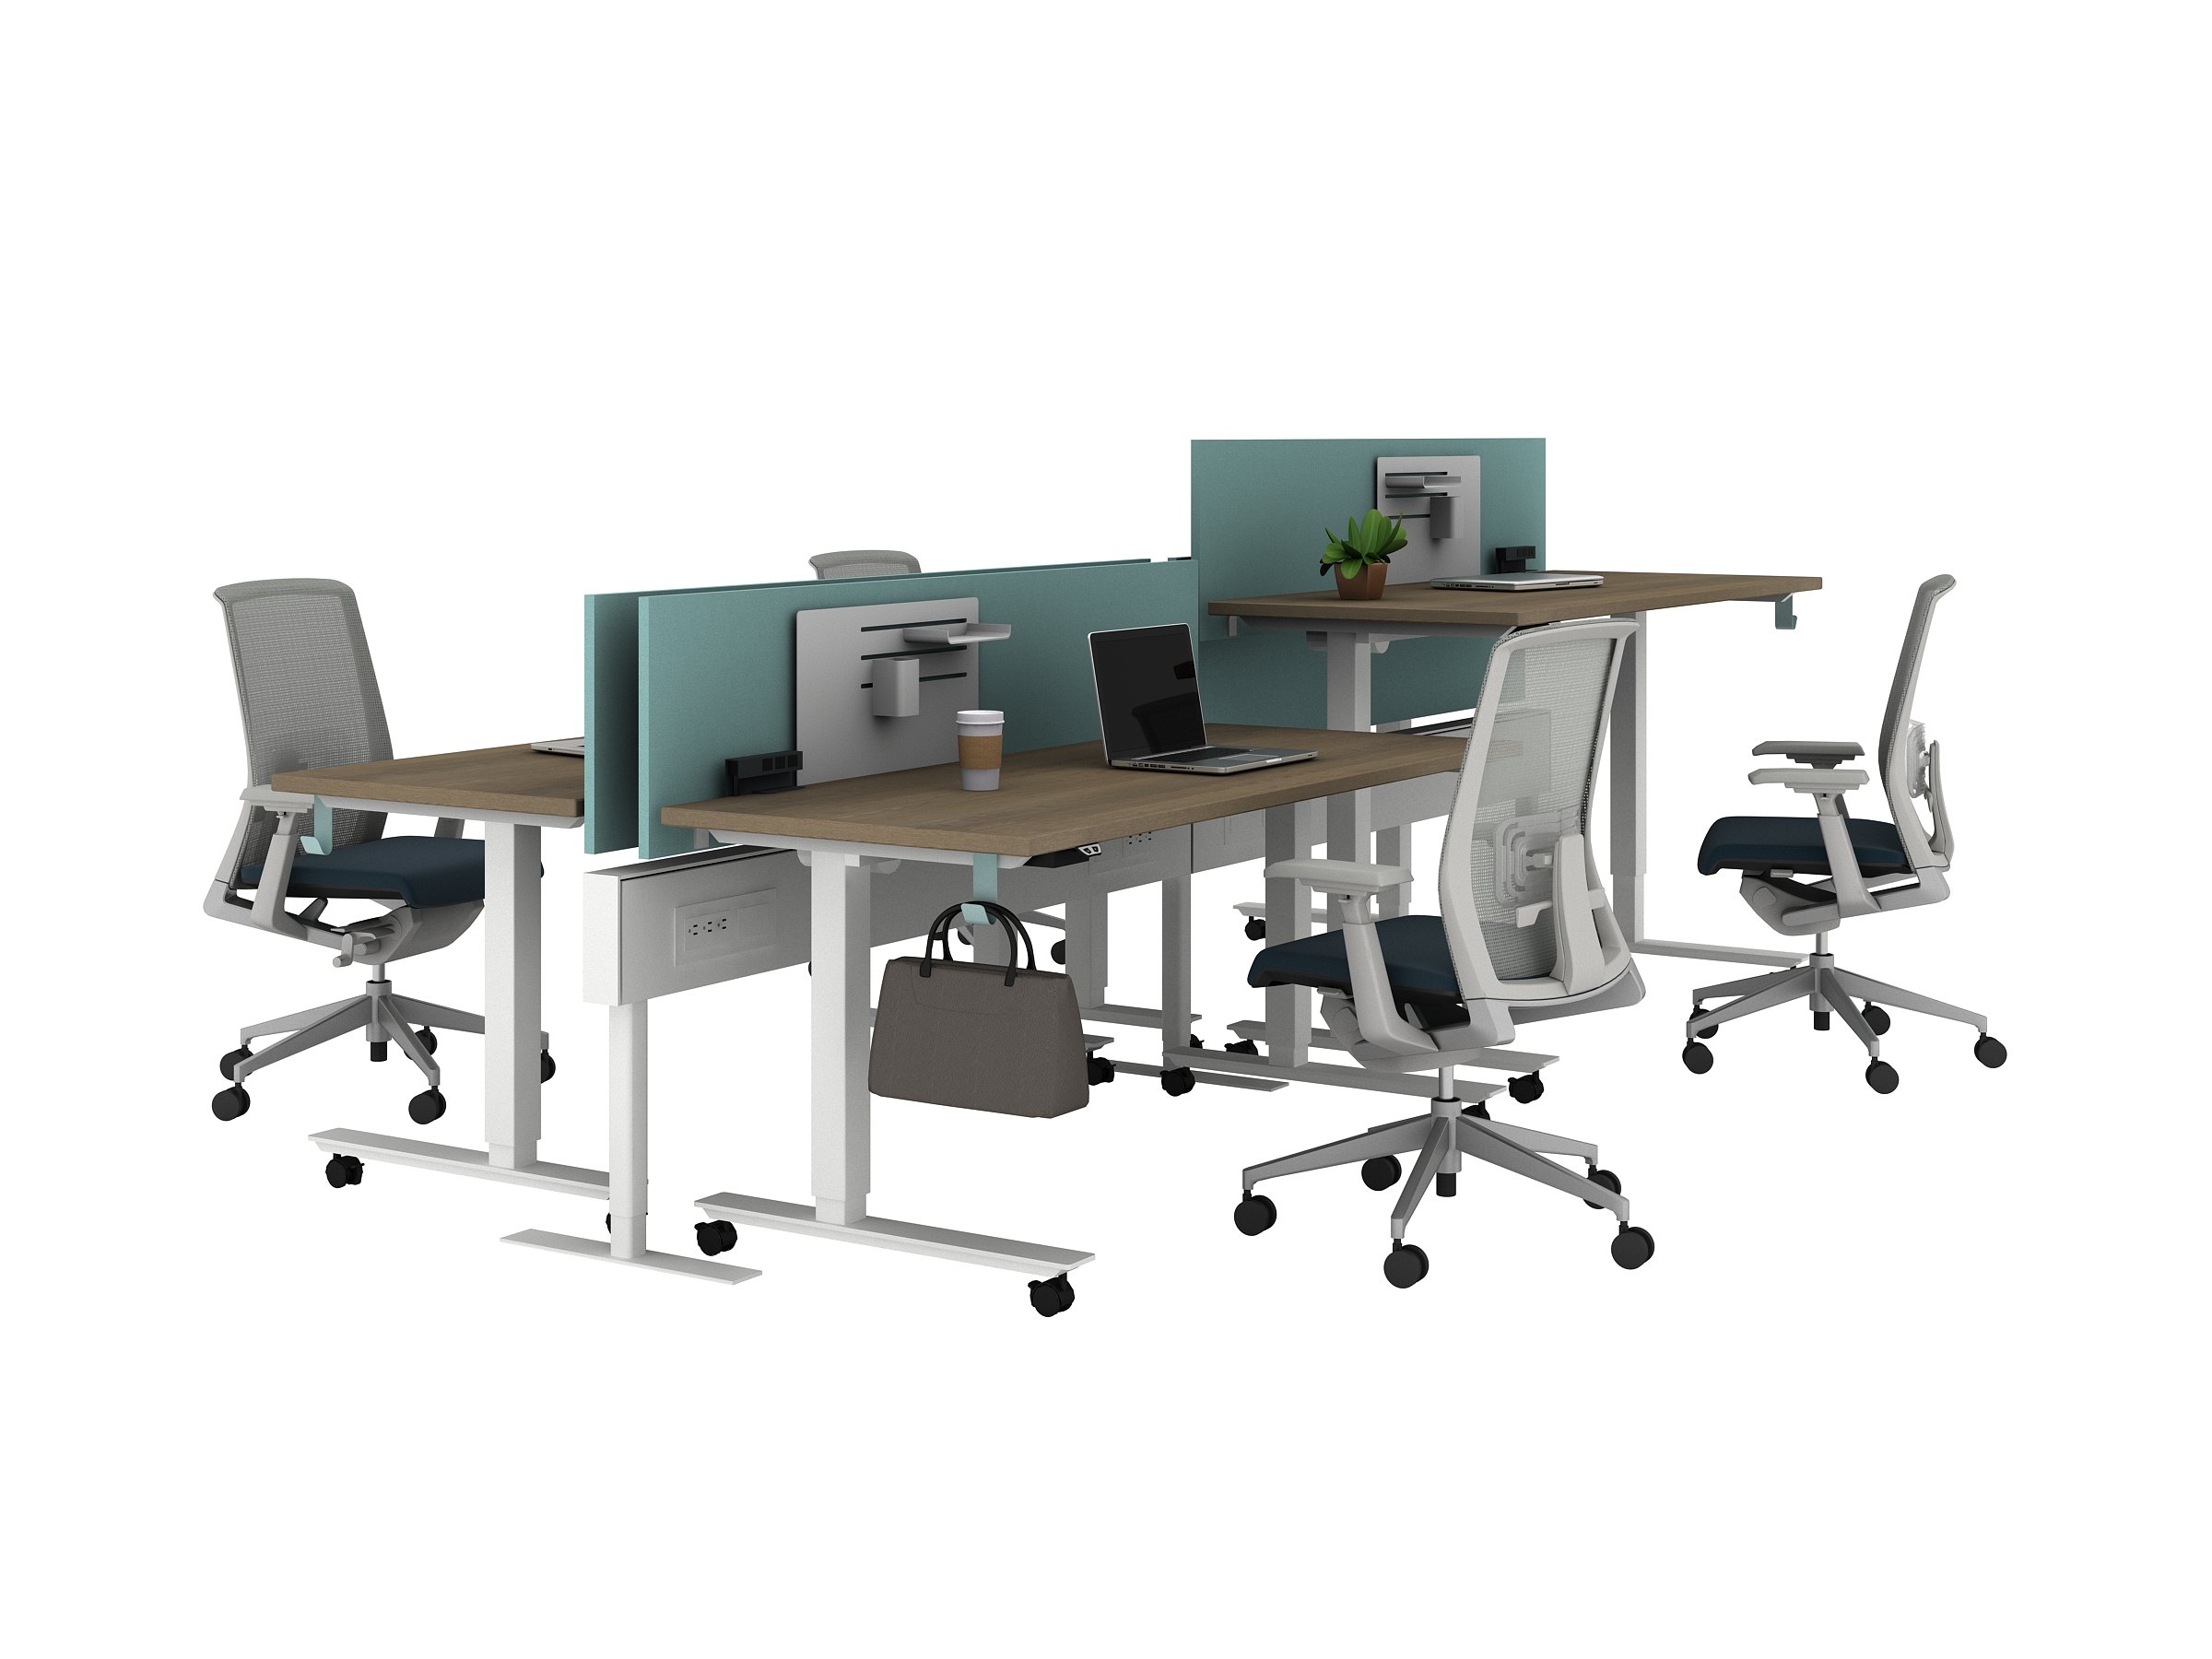 Compose Beam with Very Task Chairs and Hop Height adjustable tables and Belong plus screens